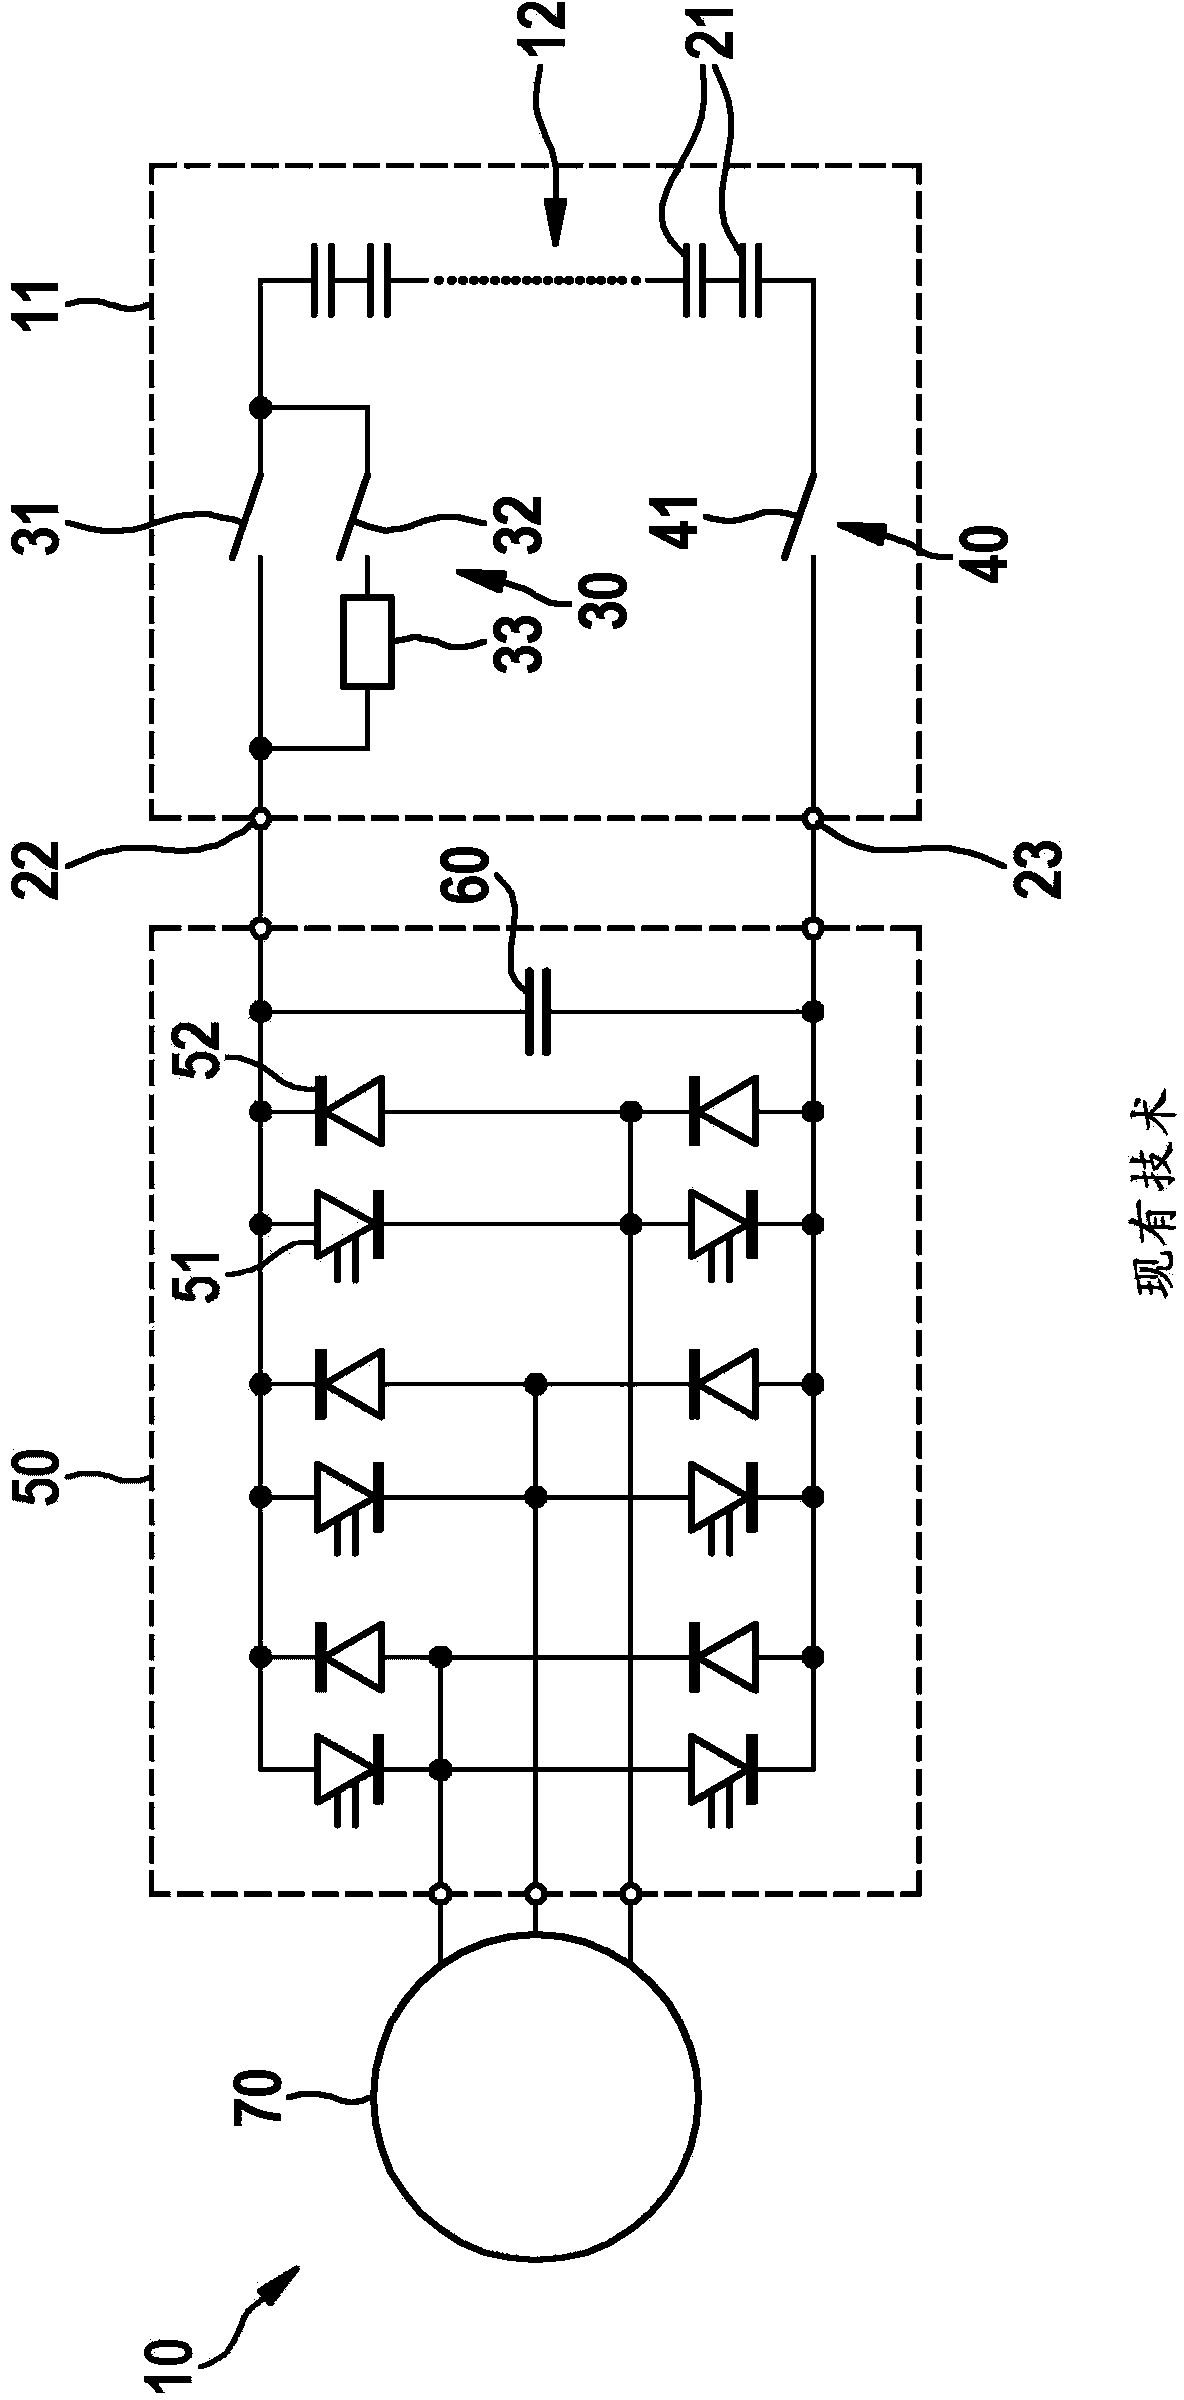 Method for operating an electric traction drive system with a battery direct inverter and associated control apparatus